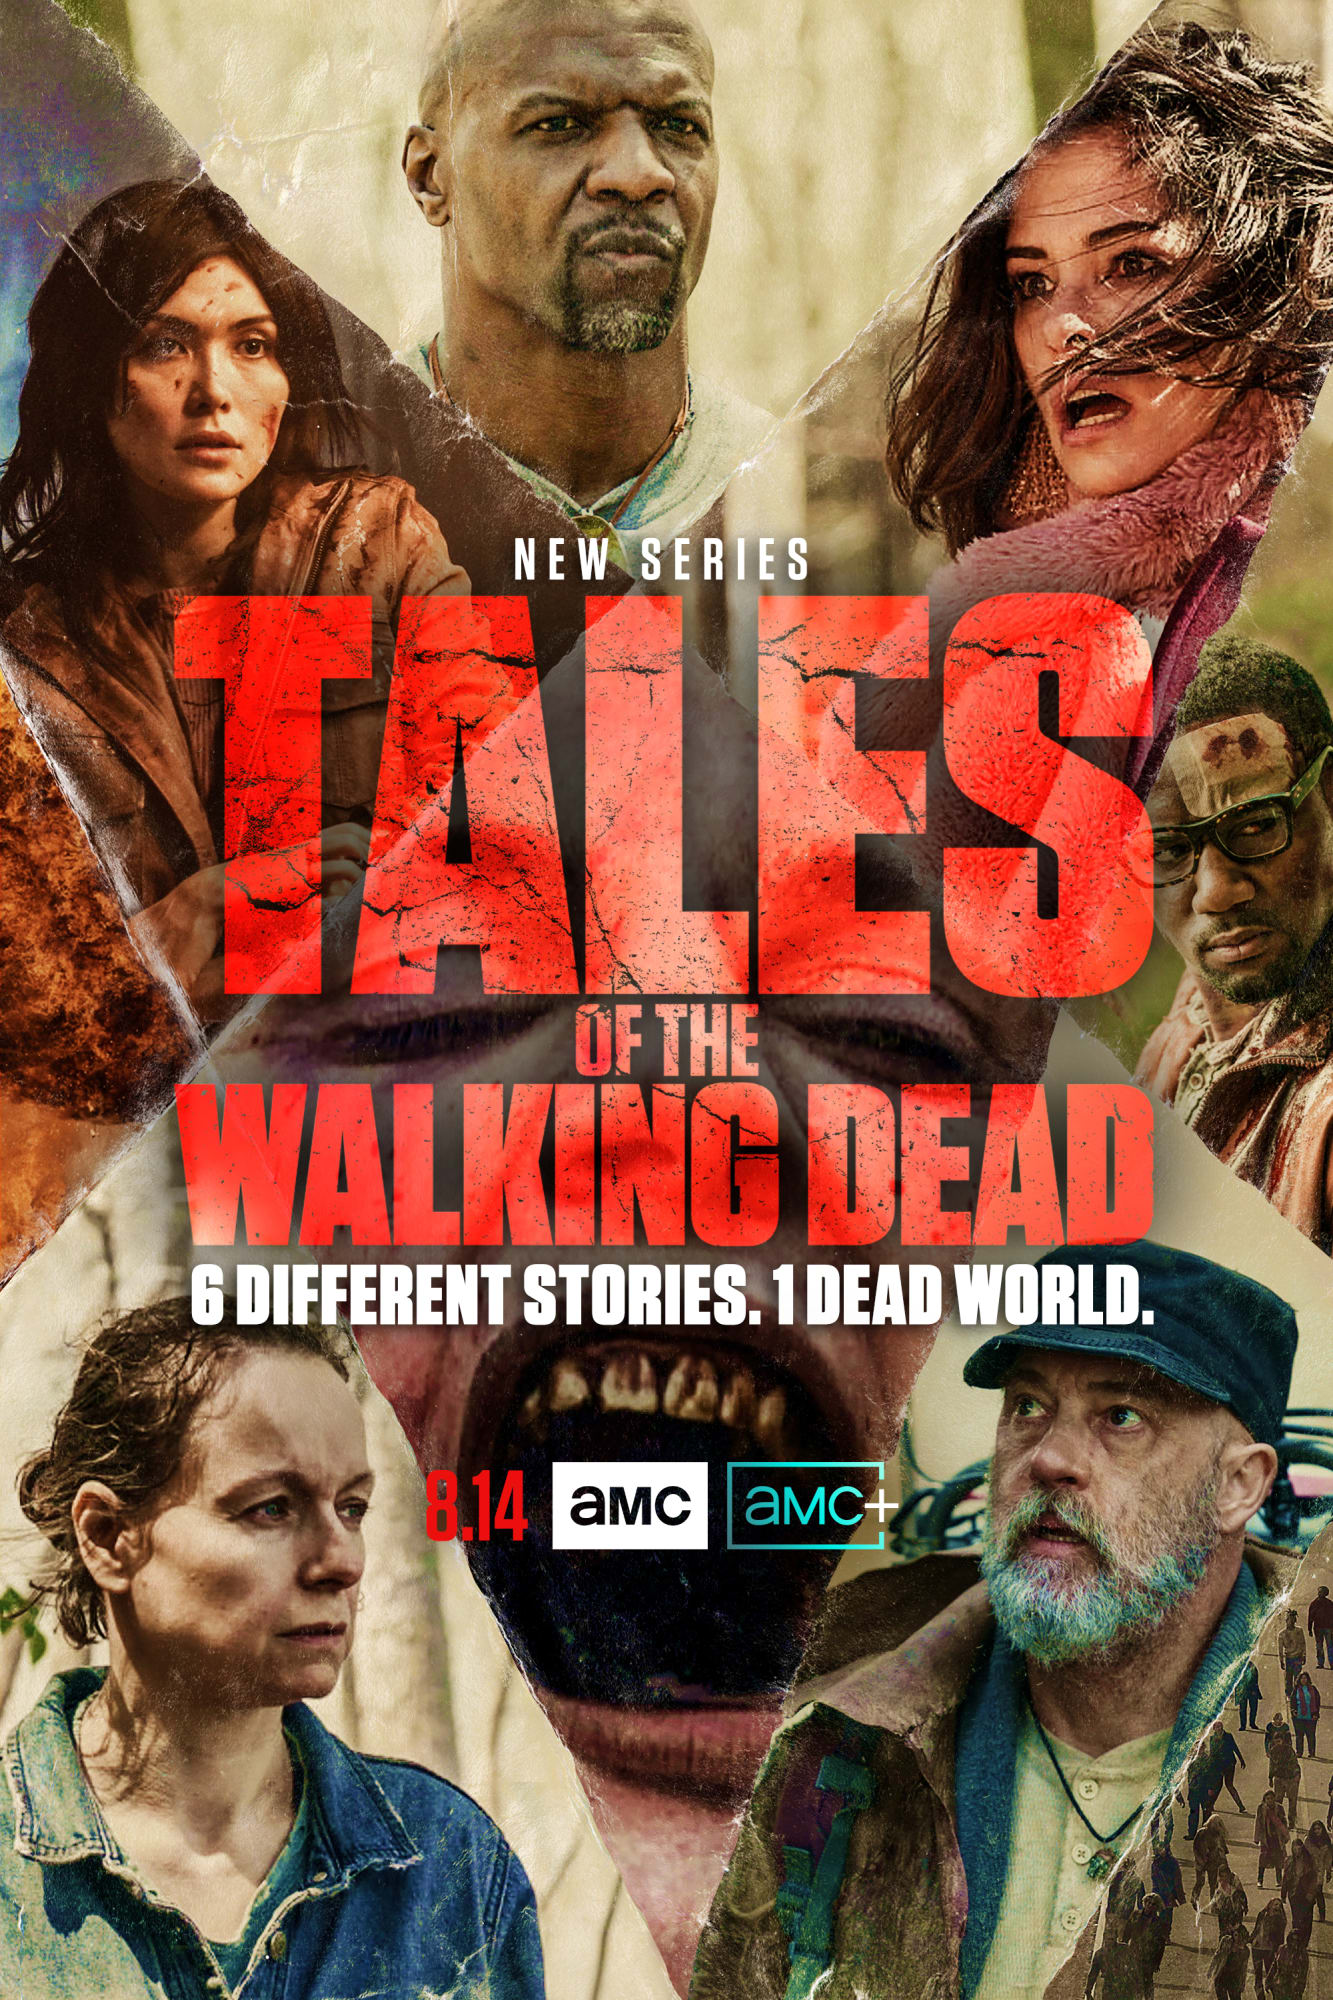 Tales of the Walking Dead cast where have you seen them before?